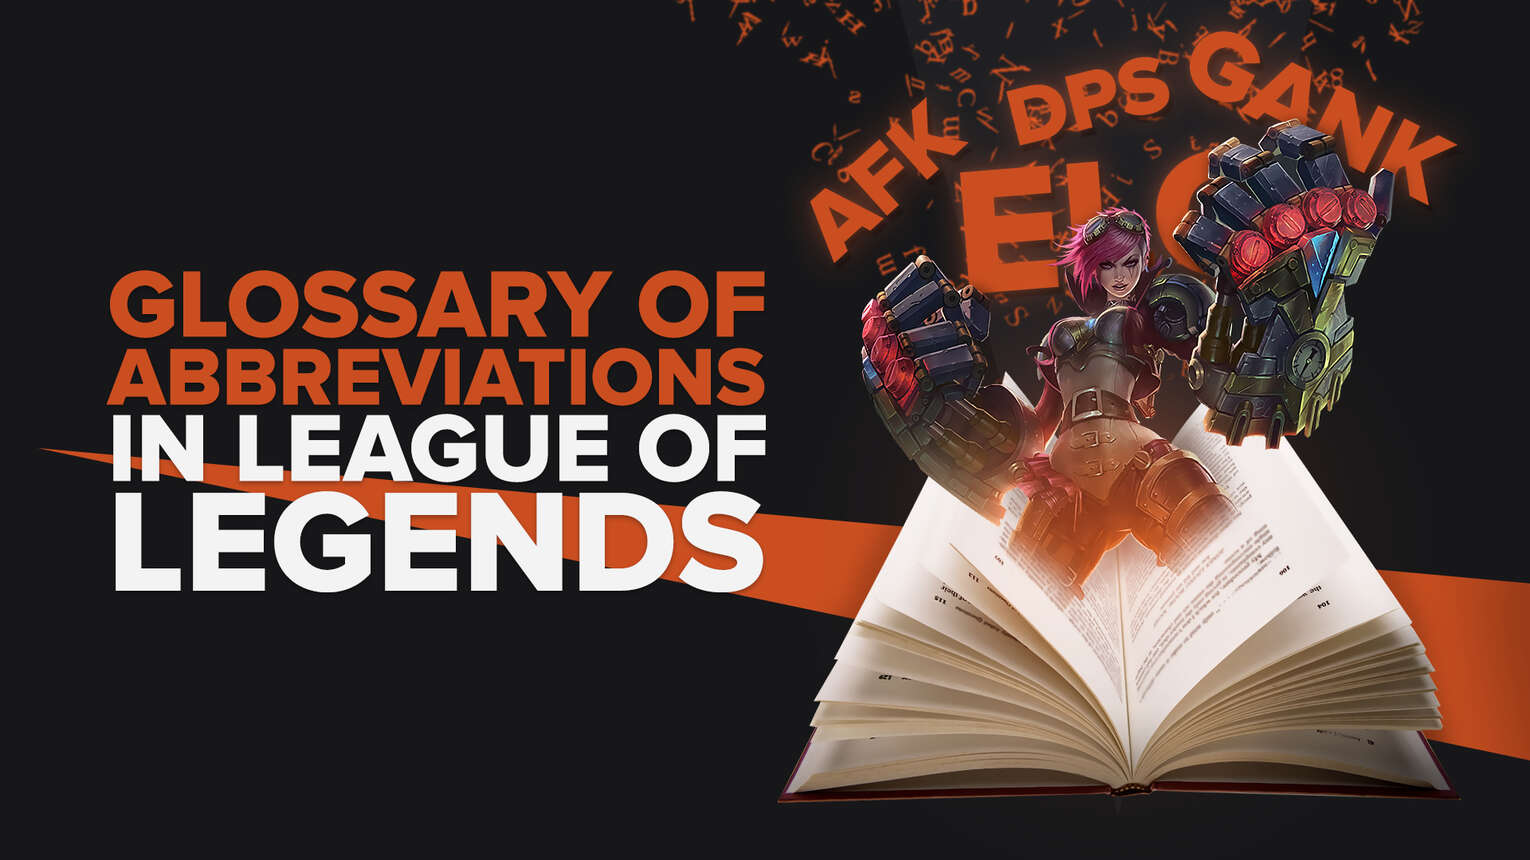 Glossary of Abbreviations in League of Legends